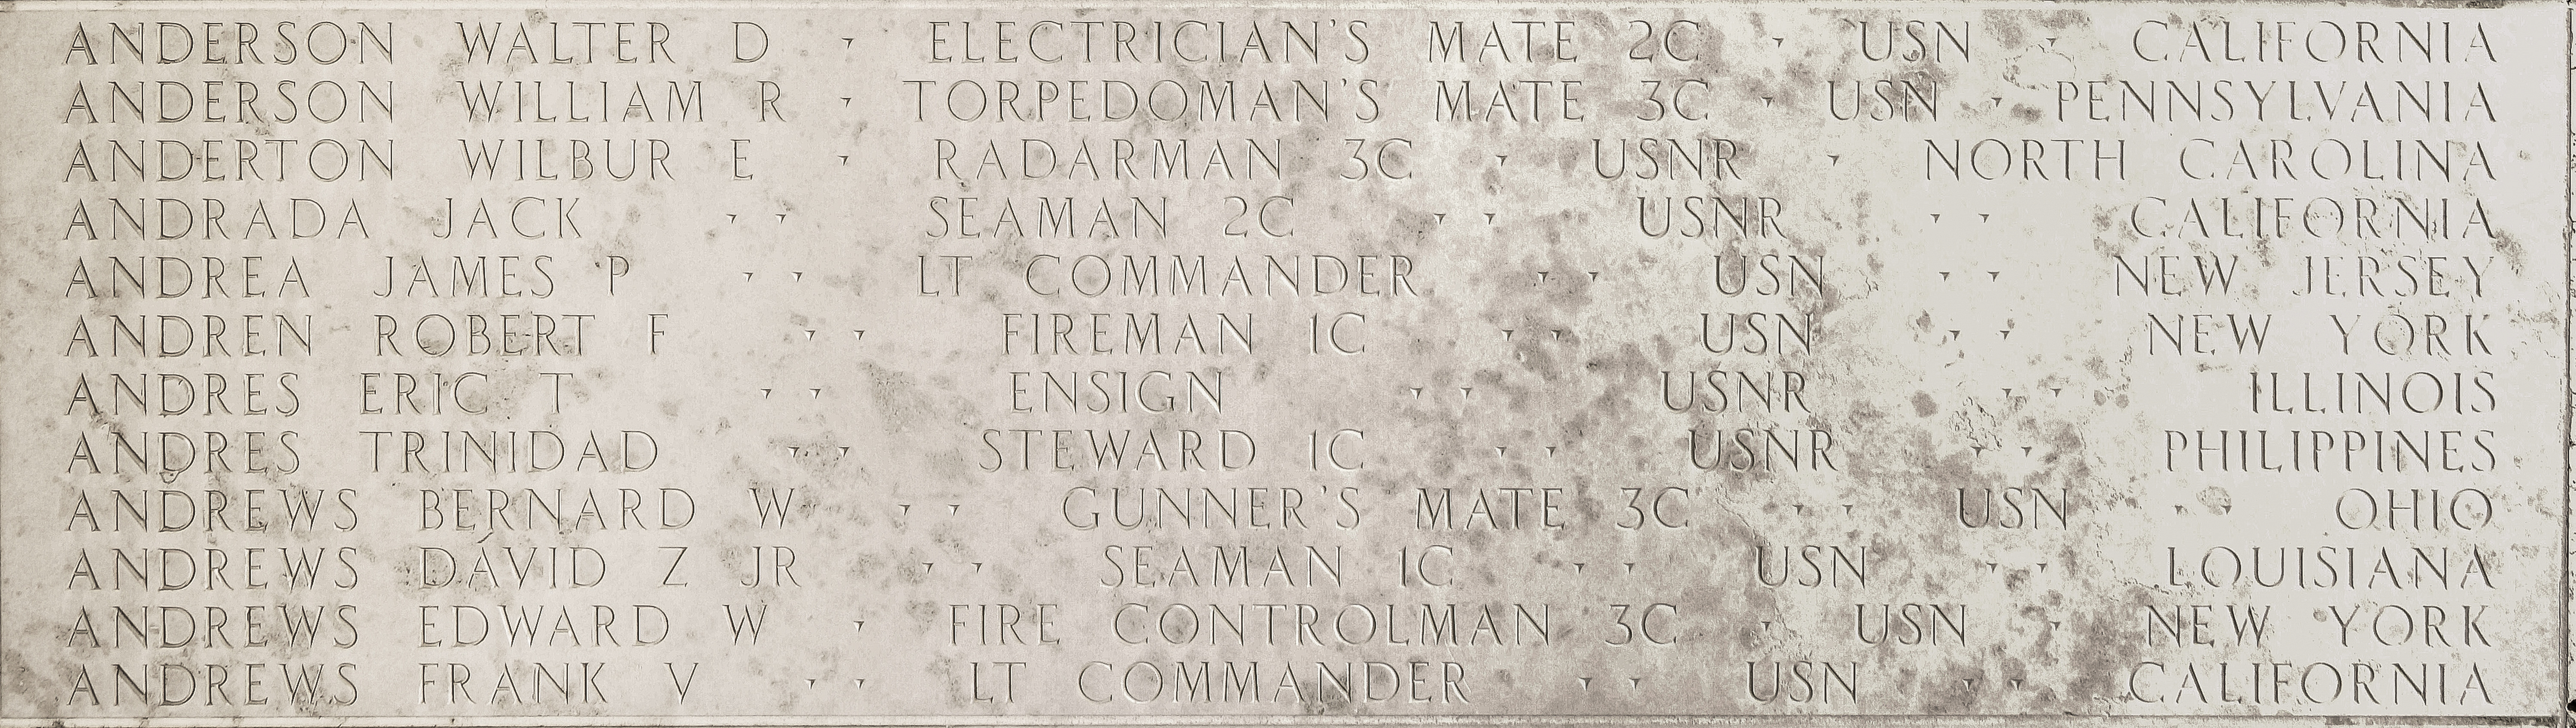 Walter D. Anderson, Electrician's Mate Second Class